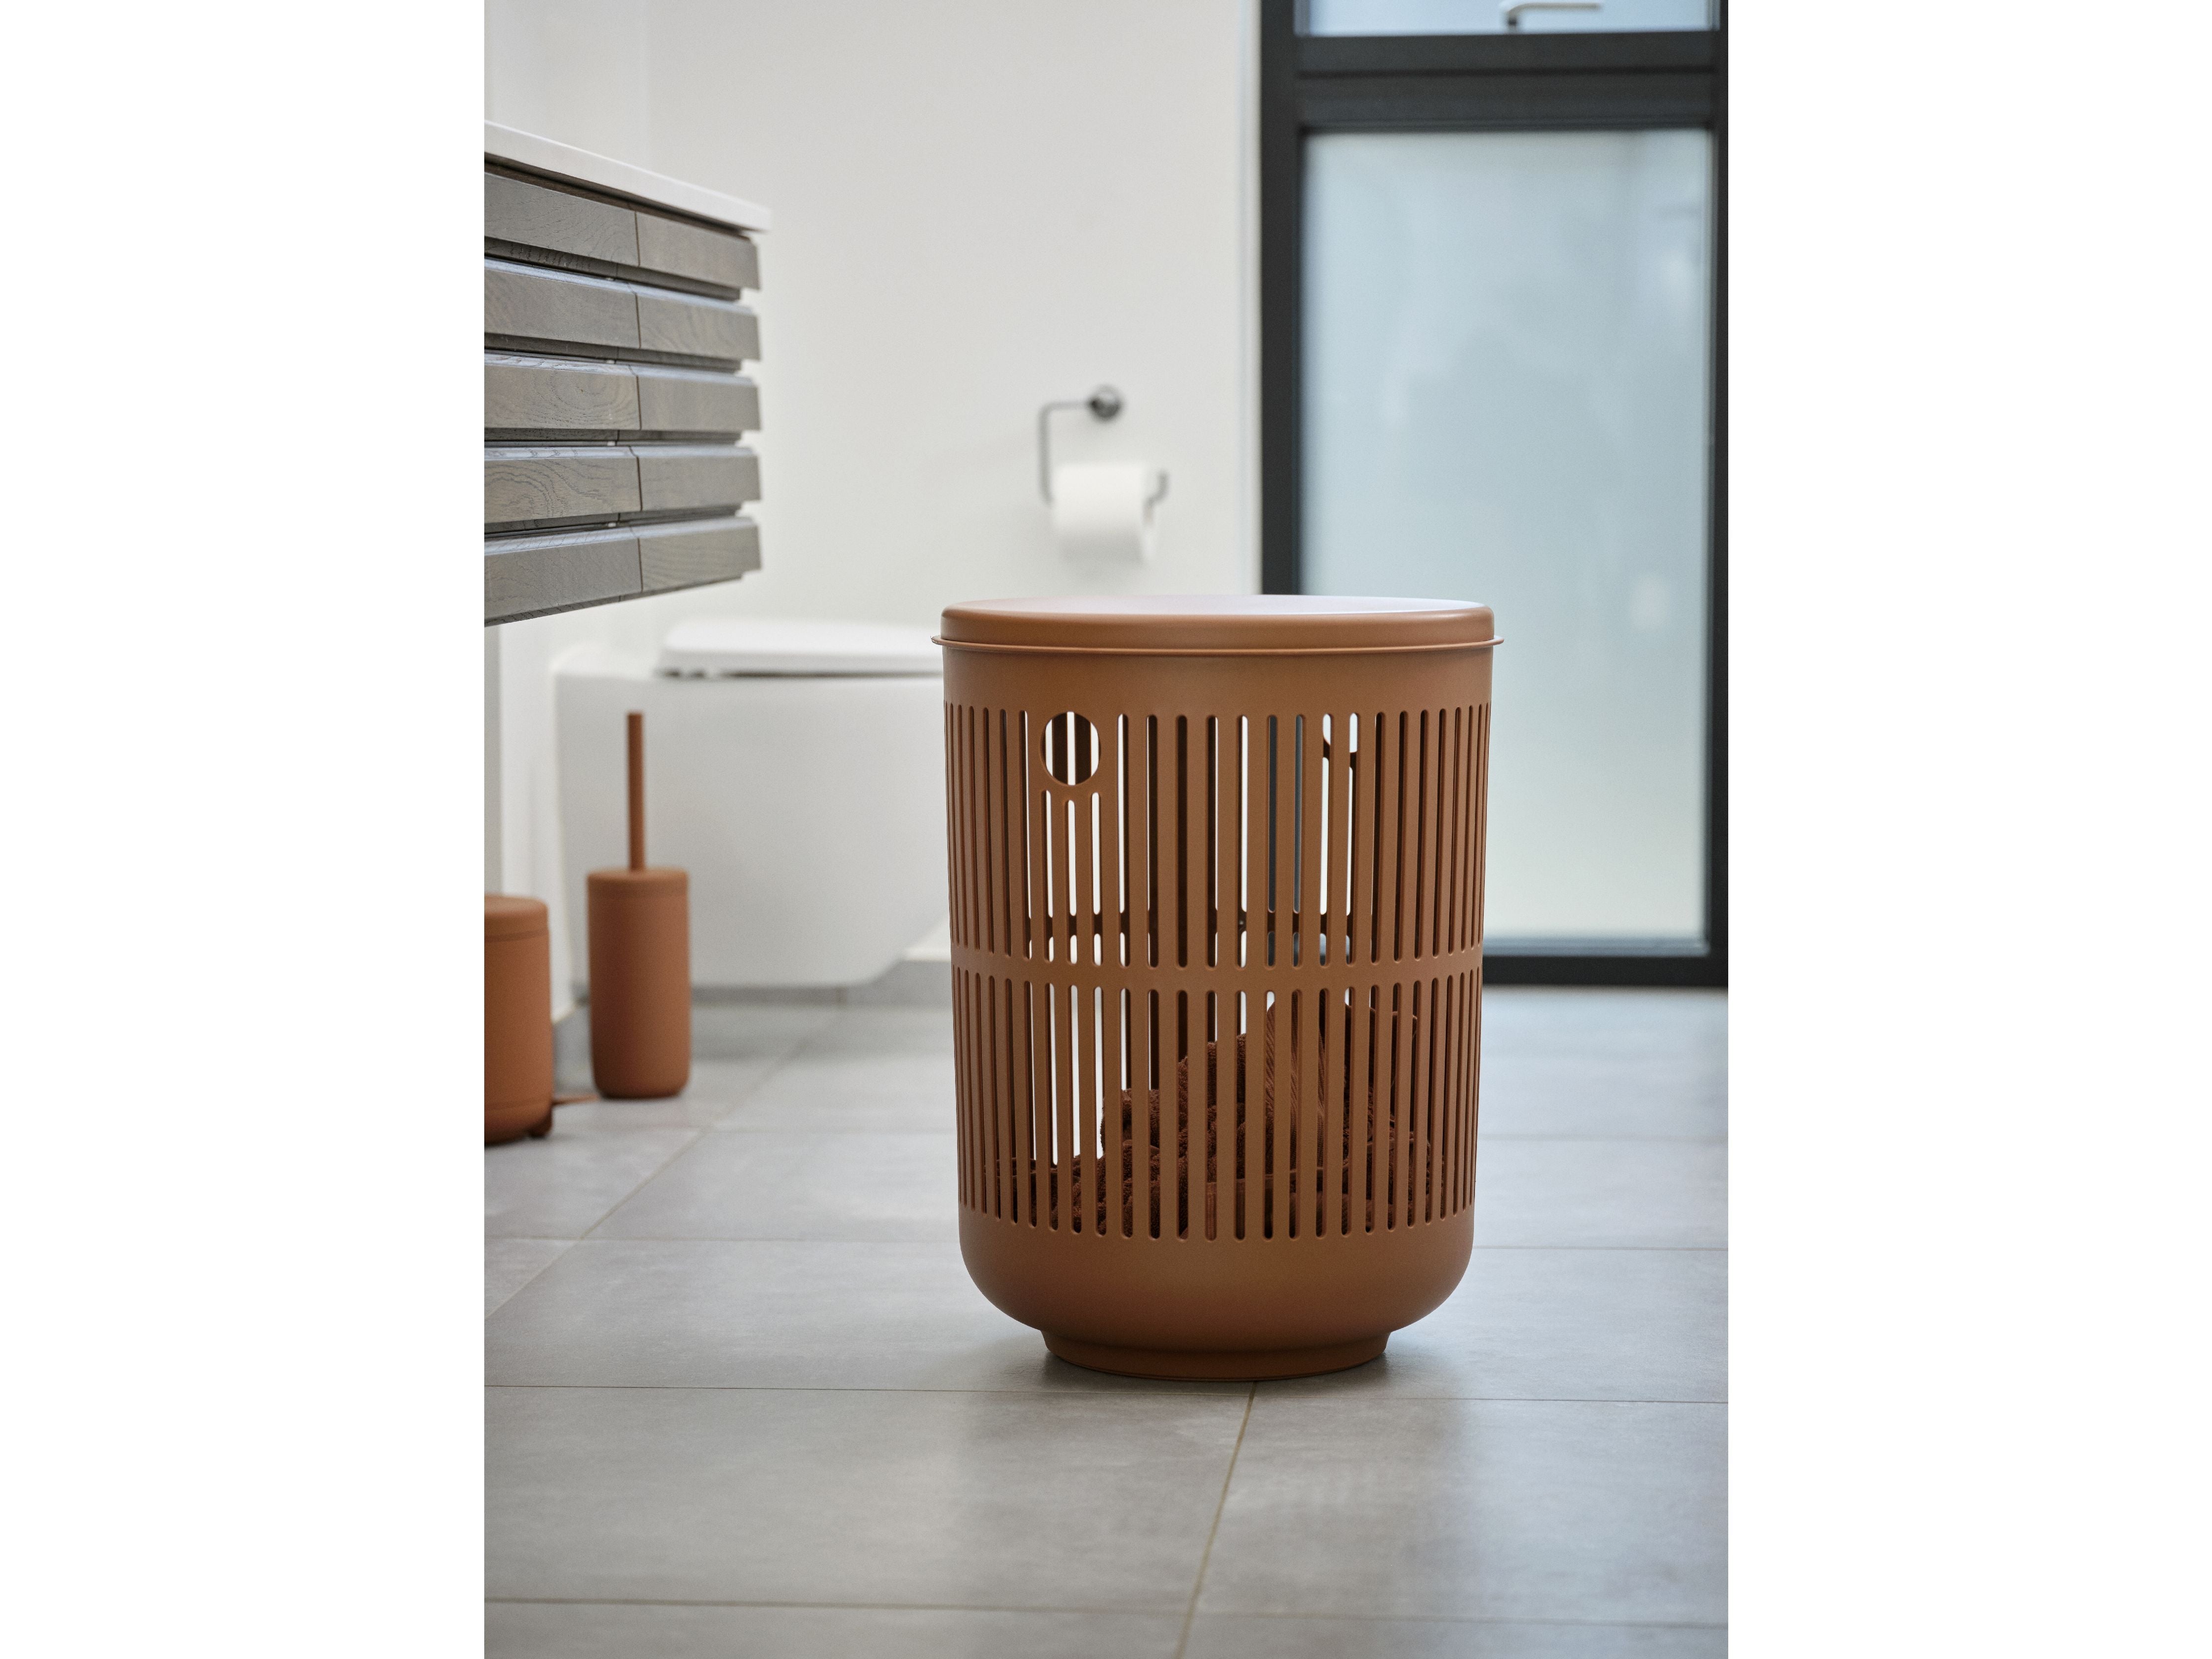 A Zone Denmark Ume Pedal Bin 4 Liter, Terracotta toilet paper holder in a bathroom, part of the Ume bath collection.